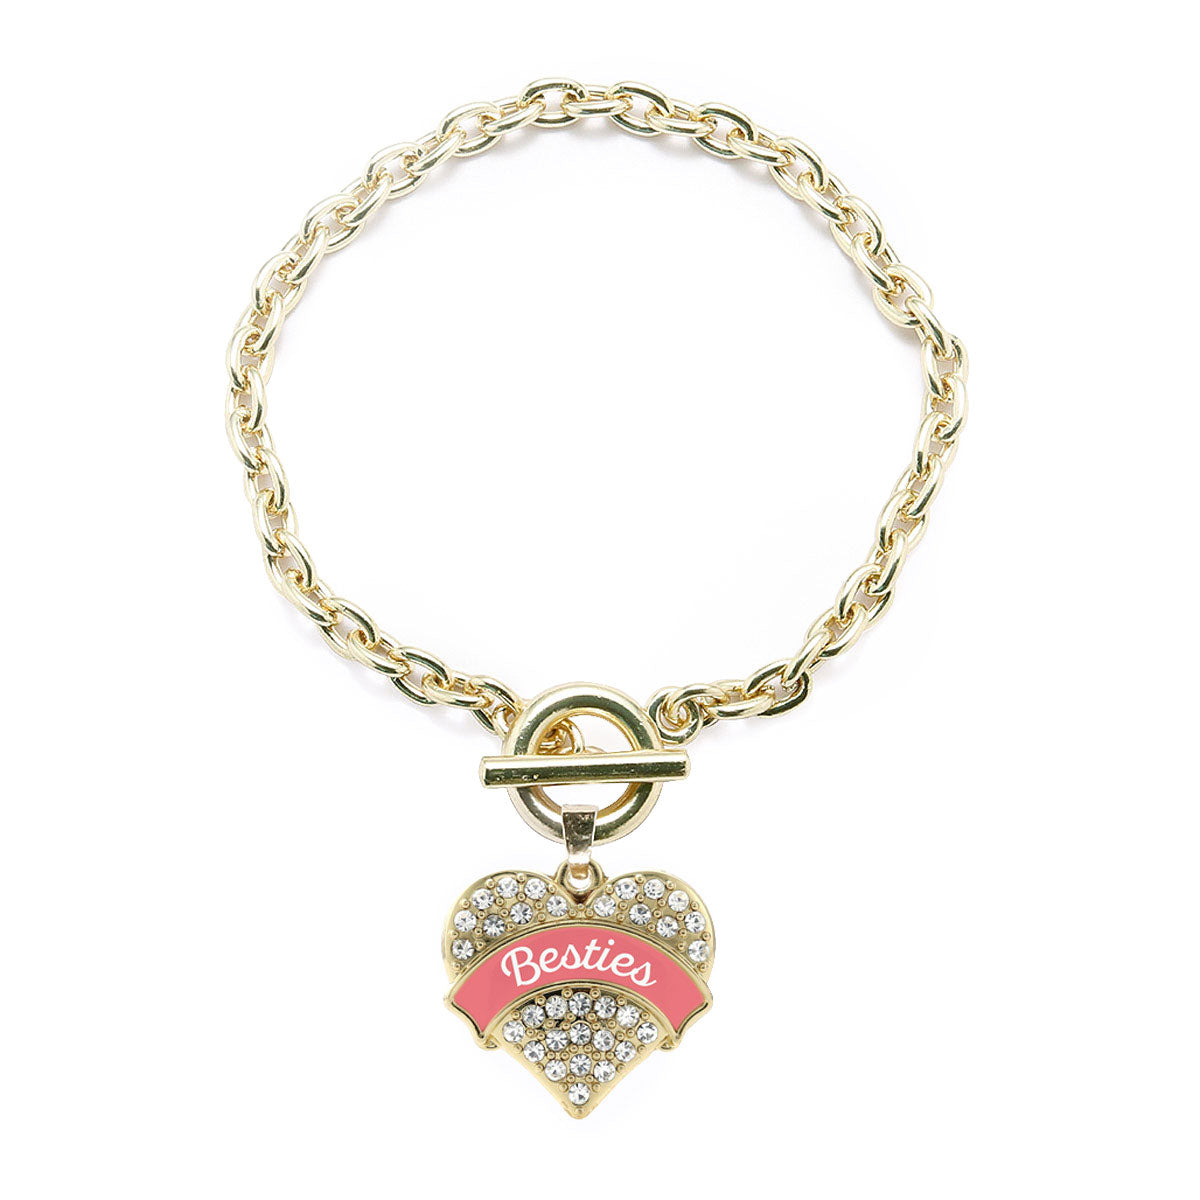 Gold Coral Besties Pave Heart Charm Toggle Bracelet